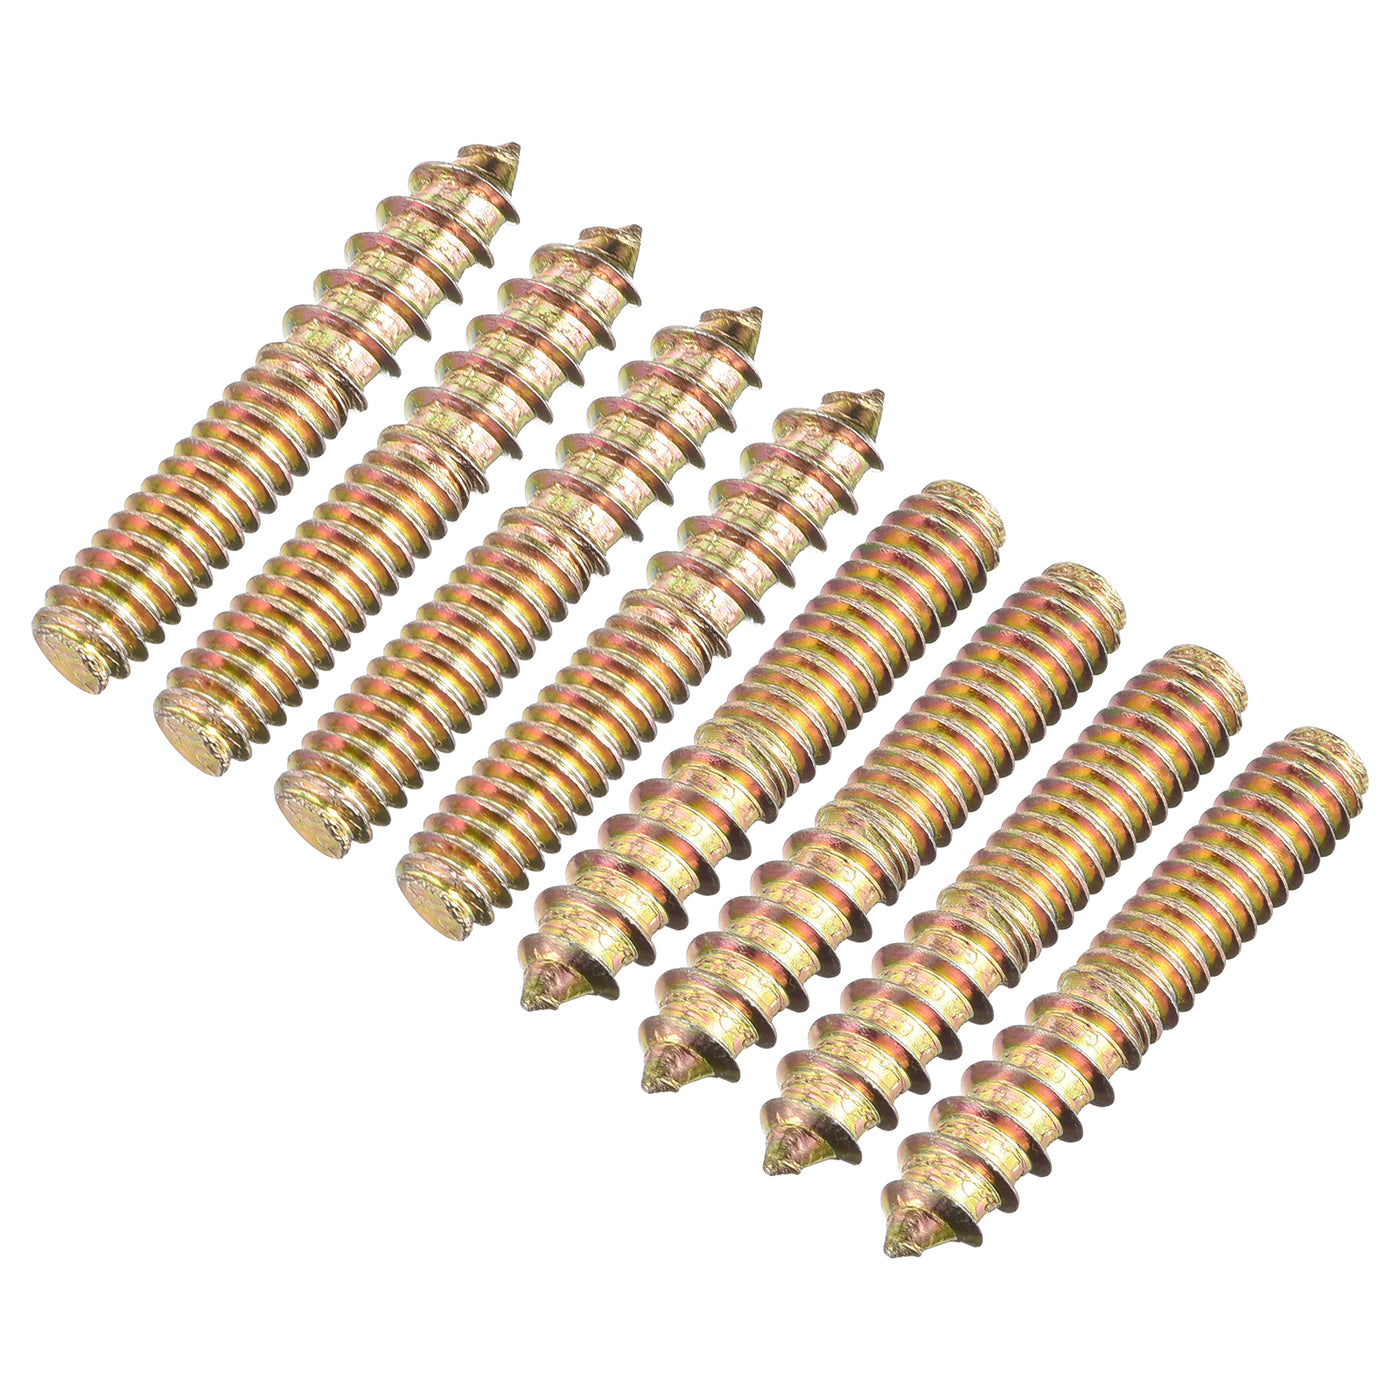 uxcell Uxcell 1/4-20x1-1/2" Hanger Bolts, 16pcs Double Ended Screws Wood Dowel Screws